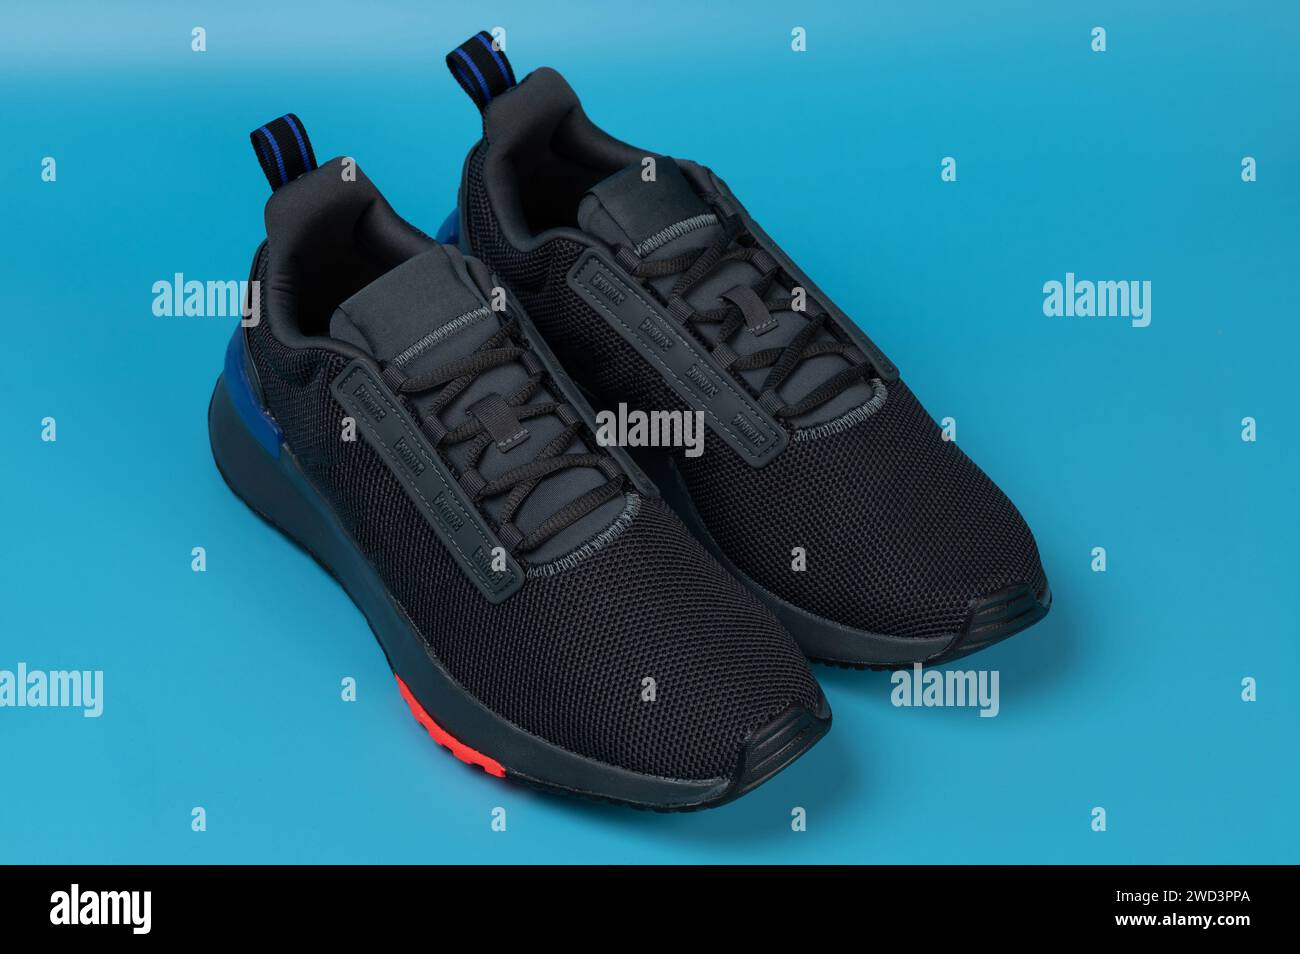 Black sport run shoes with laces perspective view isolated on blue studio background Stock Photo